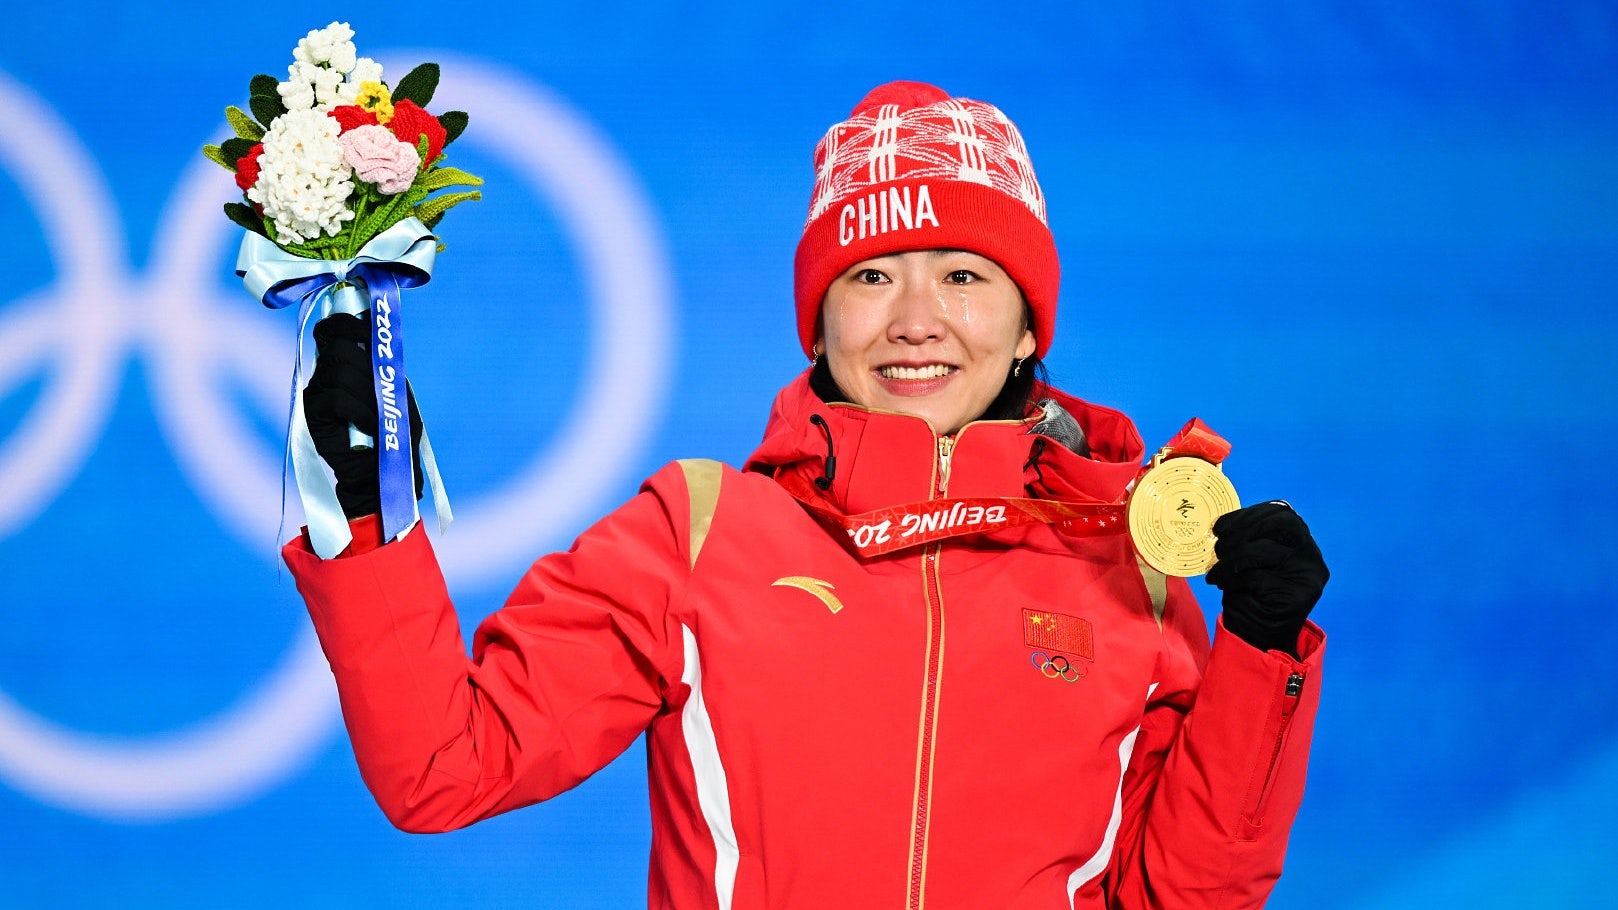 Official sportswear partner of the 2022 Winter Olympics, ANTA Sports, has been thrust into the global spotlight. But there are other reasons for its boom. Photo: ANTA